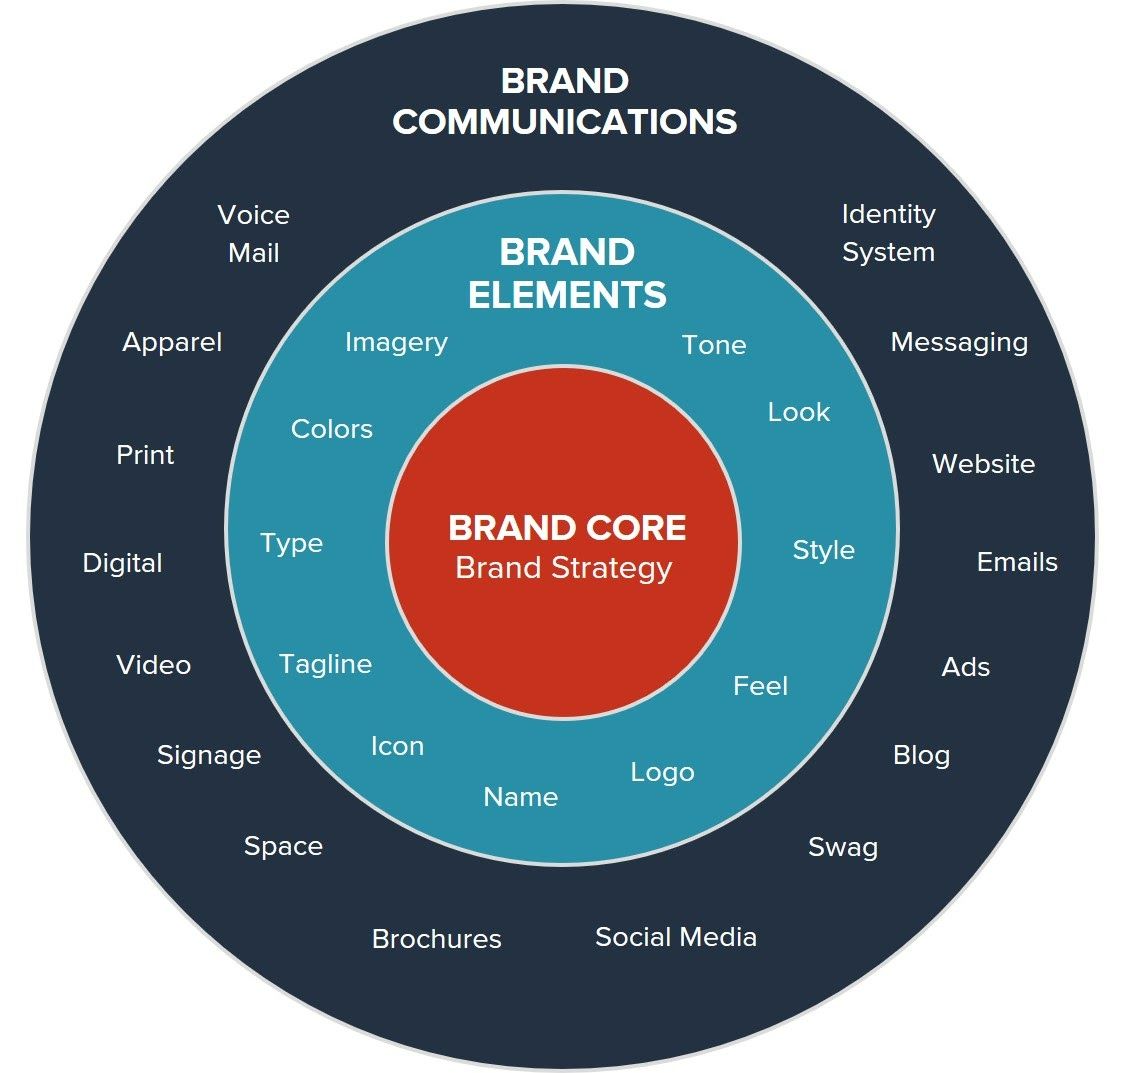 Layers to branding: core + elements + communications